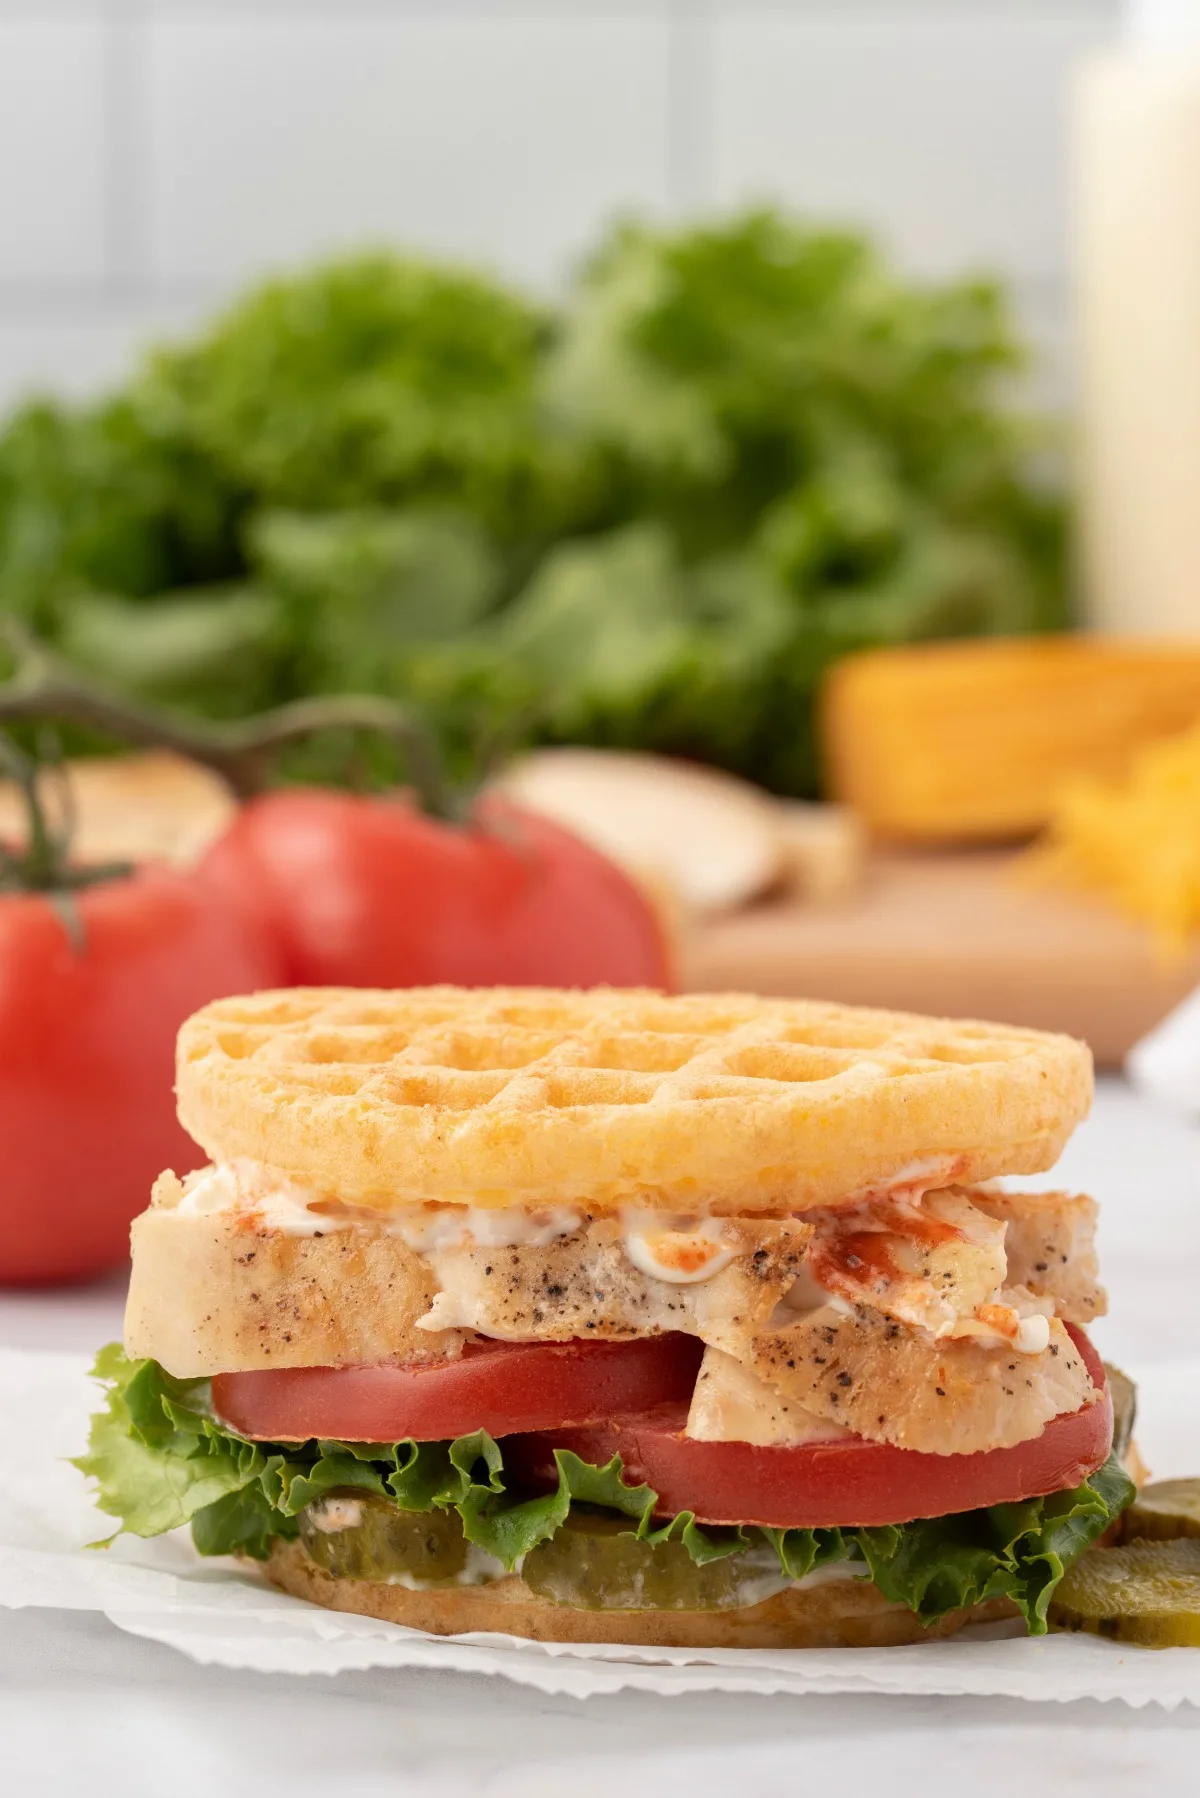 Grilled chicken and cheddar cheese on a chaffle.